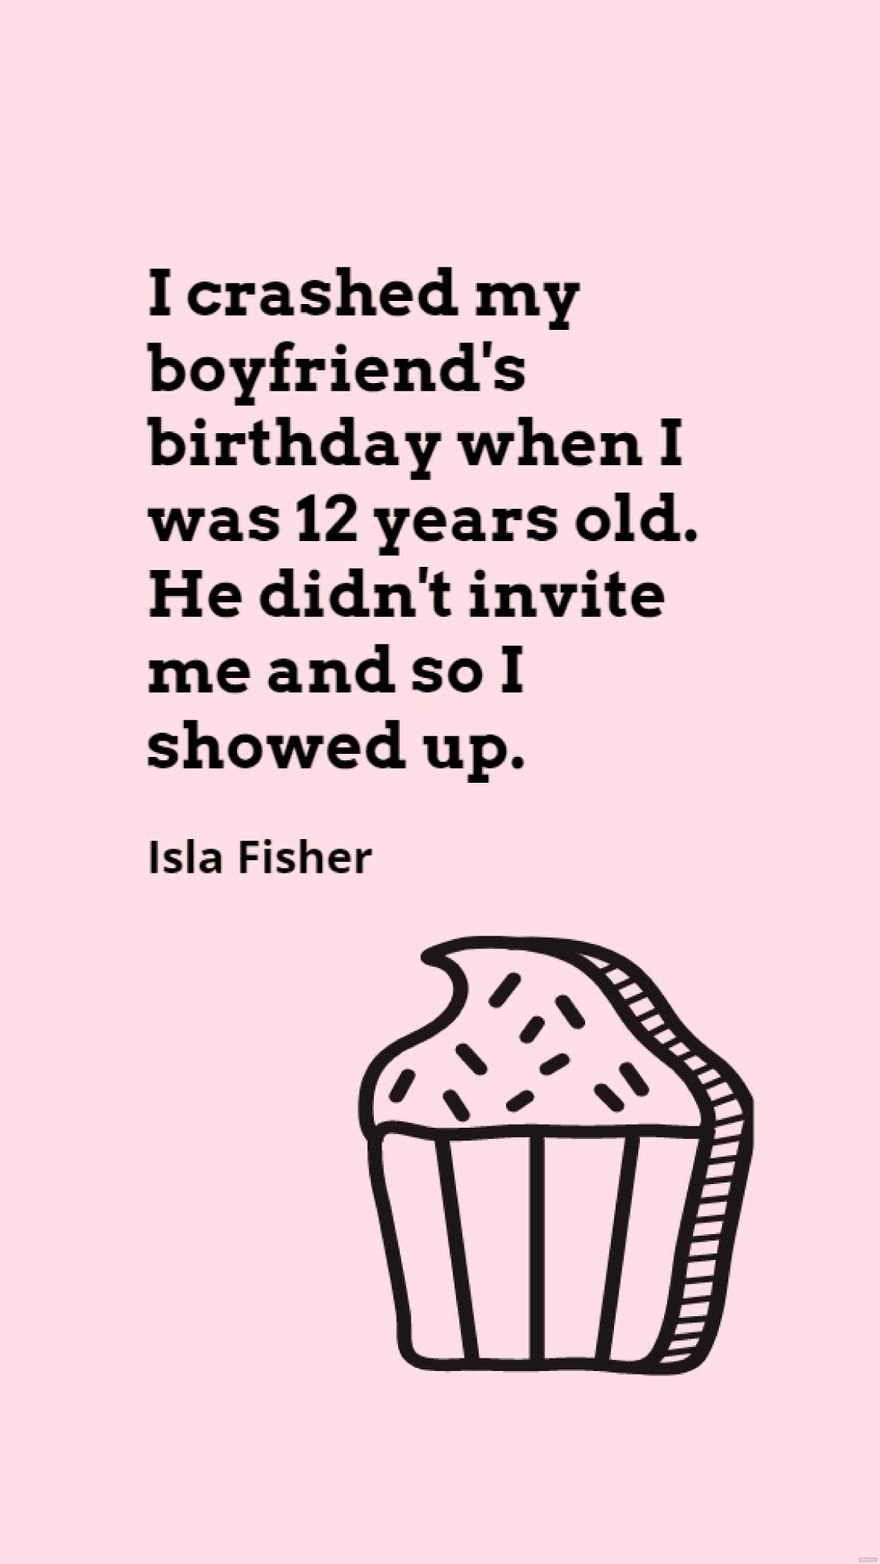 Free Isla Fisher - I crashed my boyfriend's birthday when I was 12 years old. He didn't invite me and so I showed up. in JPG